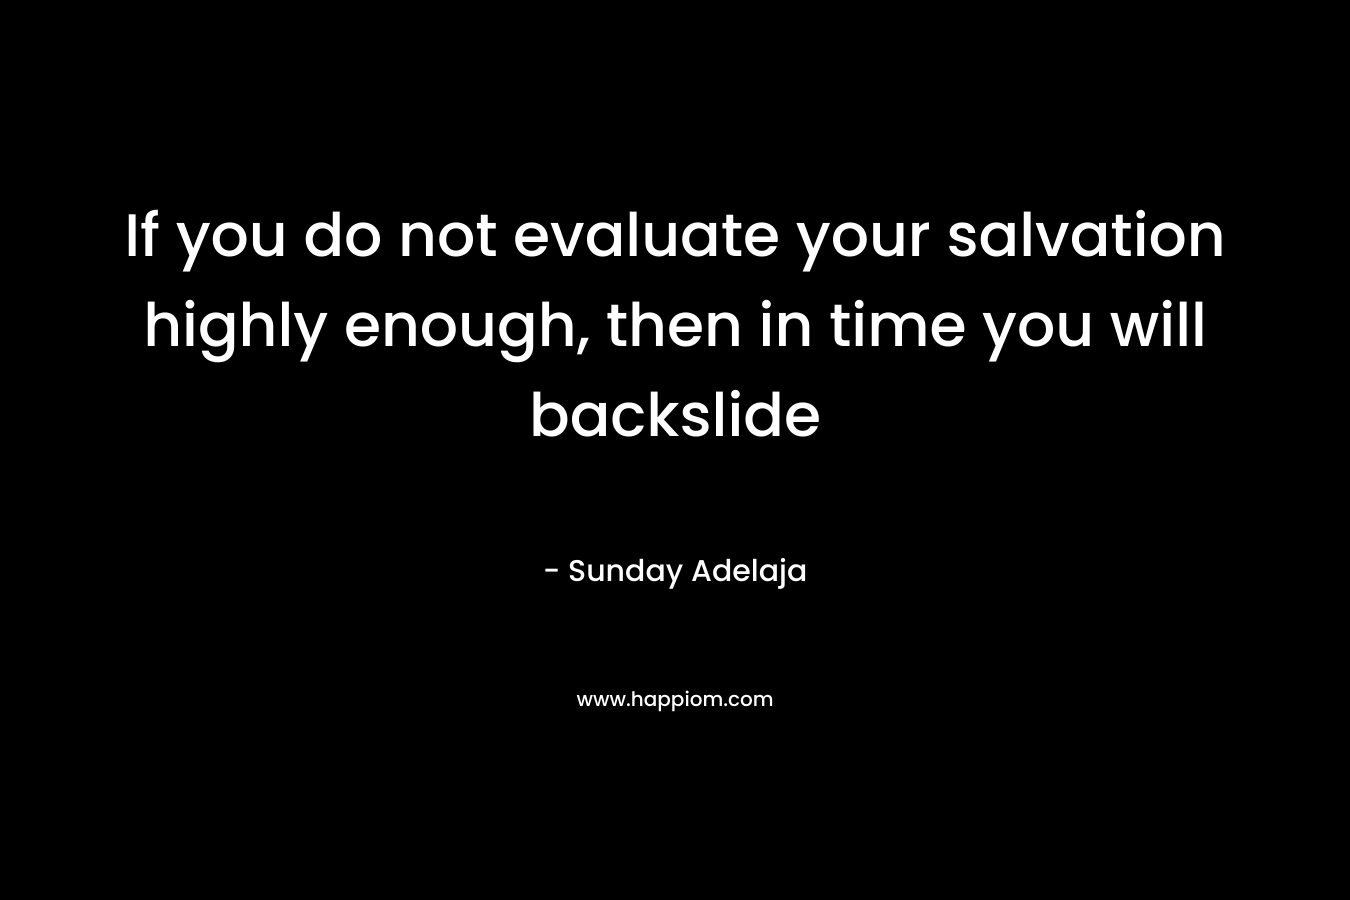 If you do not evaluate your salvation highly enough, then in time you will backslide – Sunday Adelaja